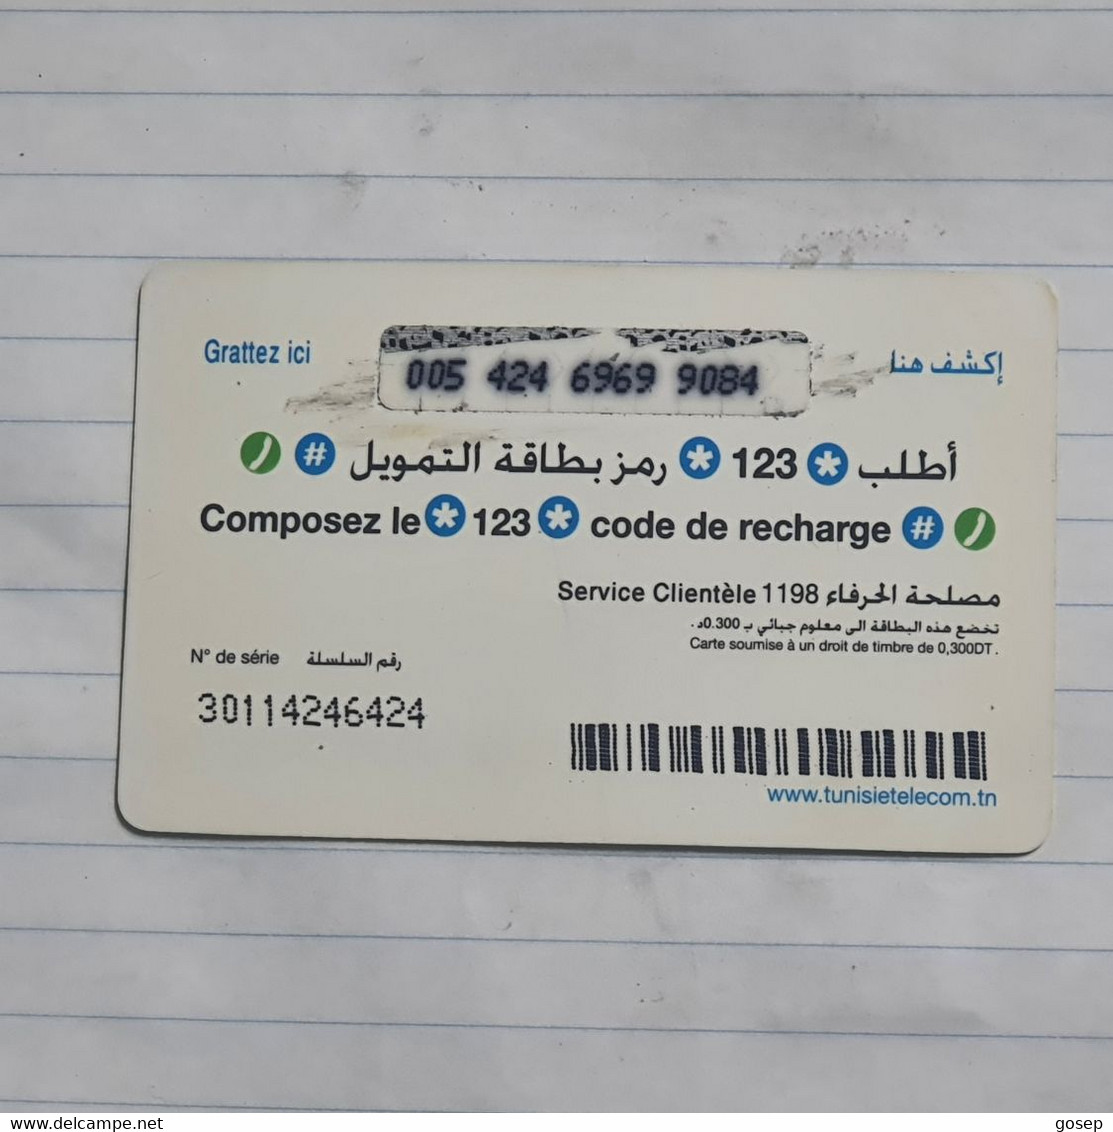 TUNISIA-(TN-TTL-REF-0032H)-GIRL1-(109)-(005-424-6969-9084)-(11/98)-(look From Out Side Card-BARCODE)-used Card - Tunisia